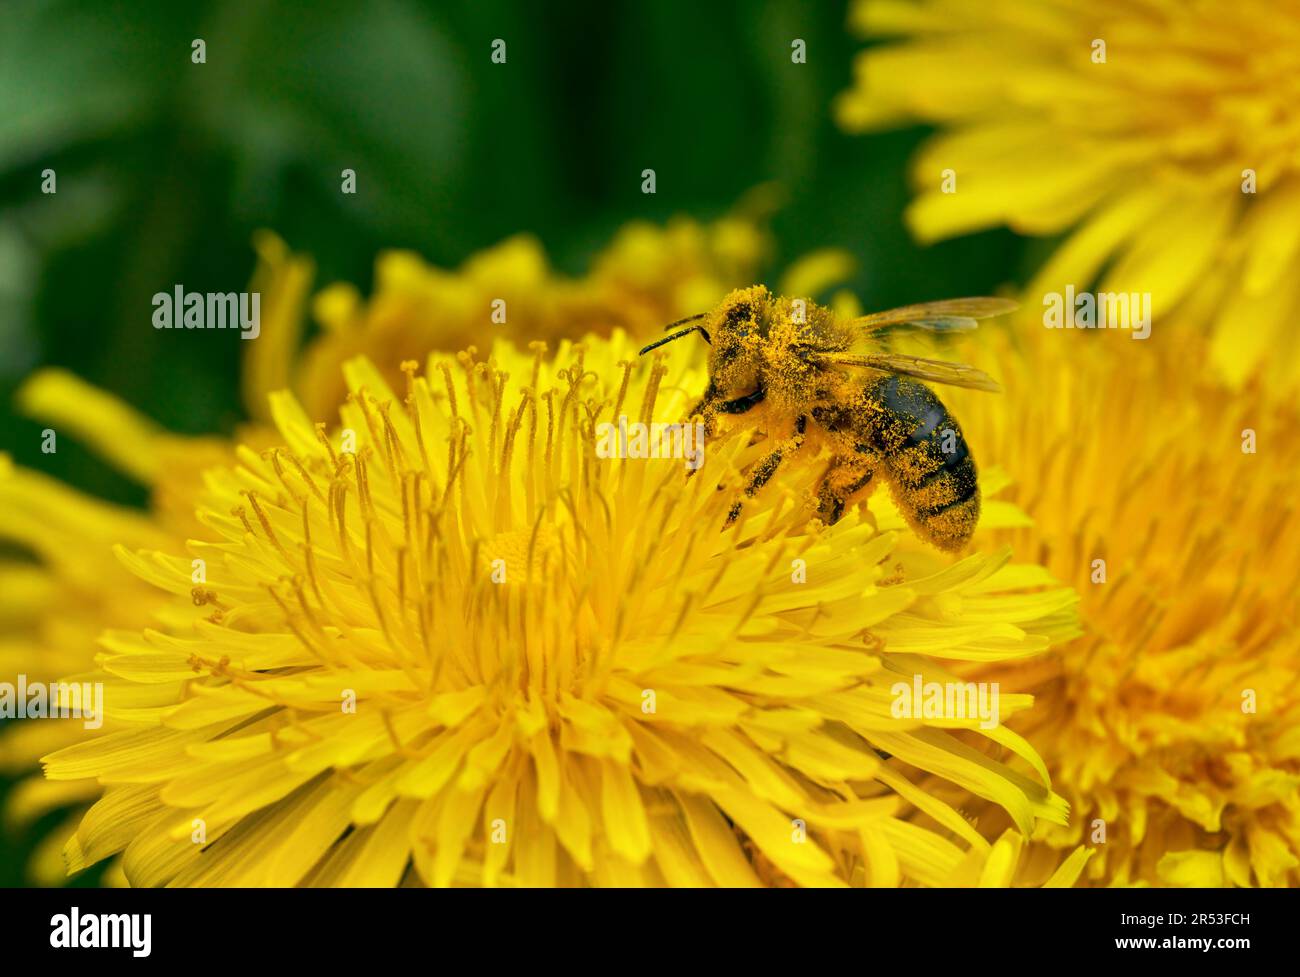 Bee full of yellow pollen in close-up on a dandelion flower Stock Photo